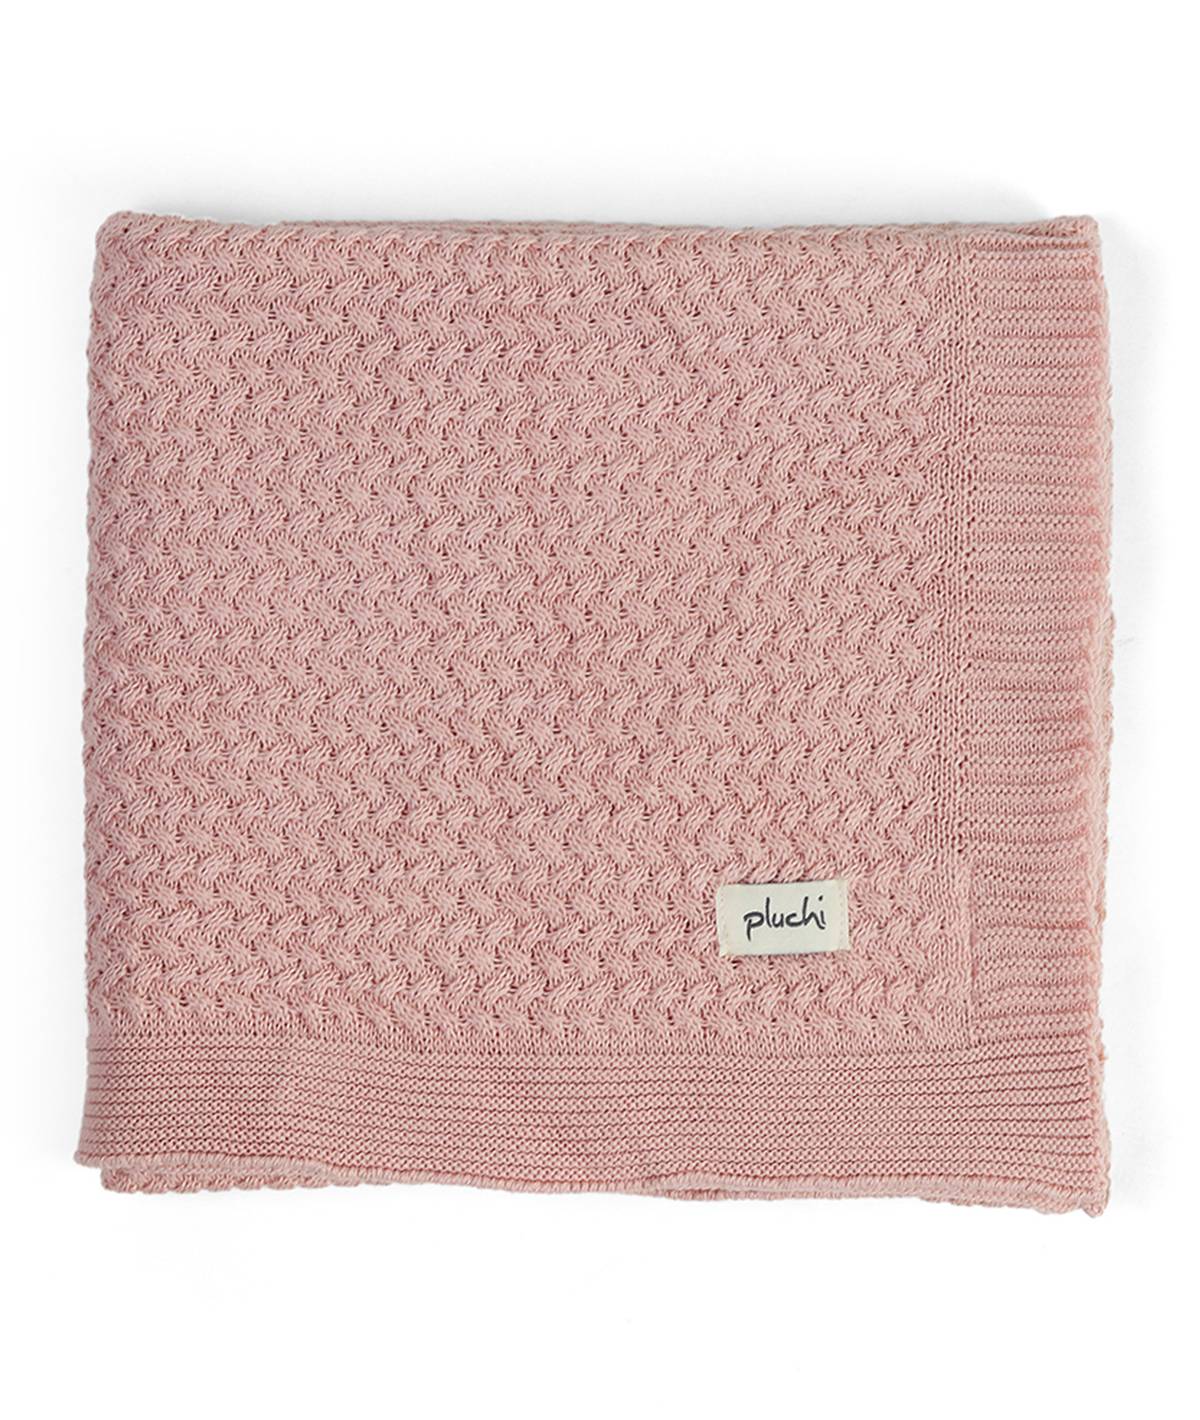 Giggle Knit Pink Color Cotton Knitted Ac Blanket For Baby / Infant / New Born For Use In All Seasons